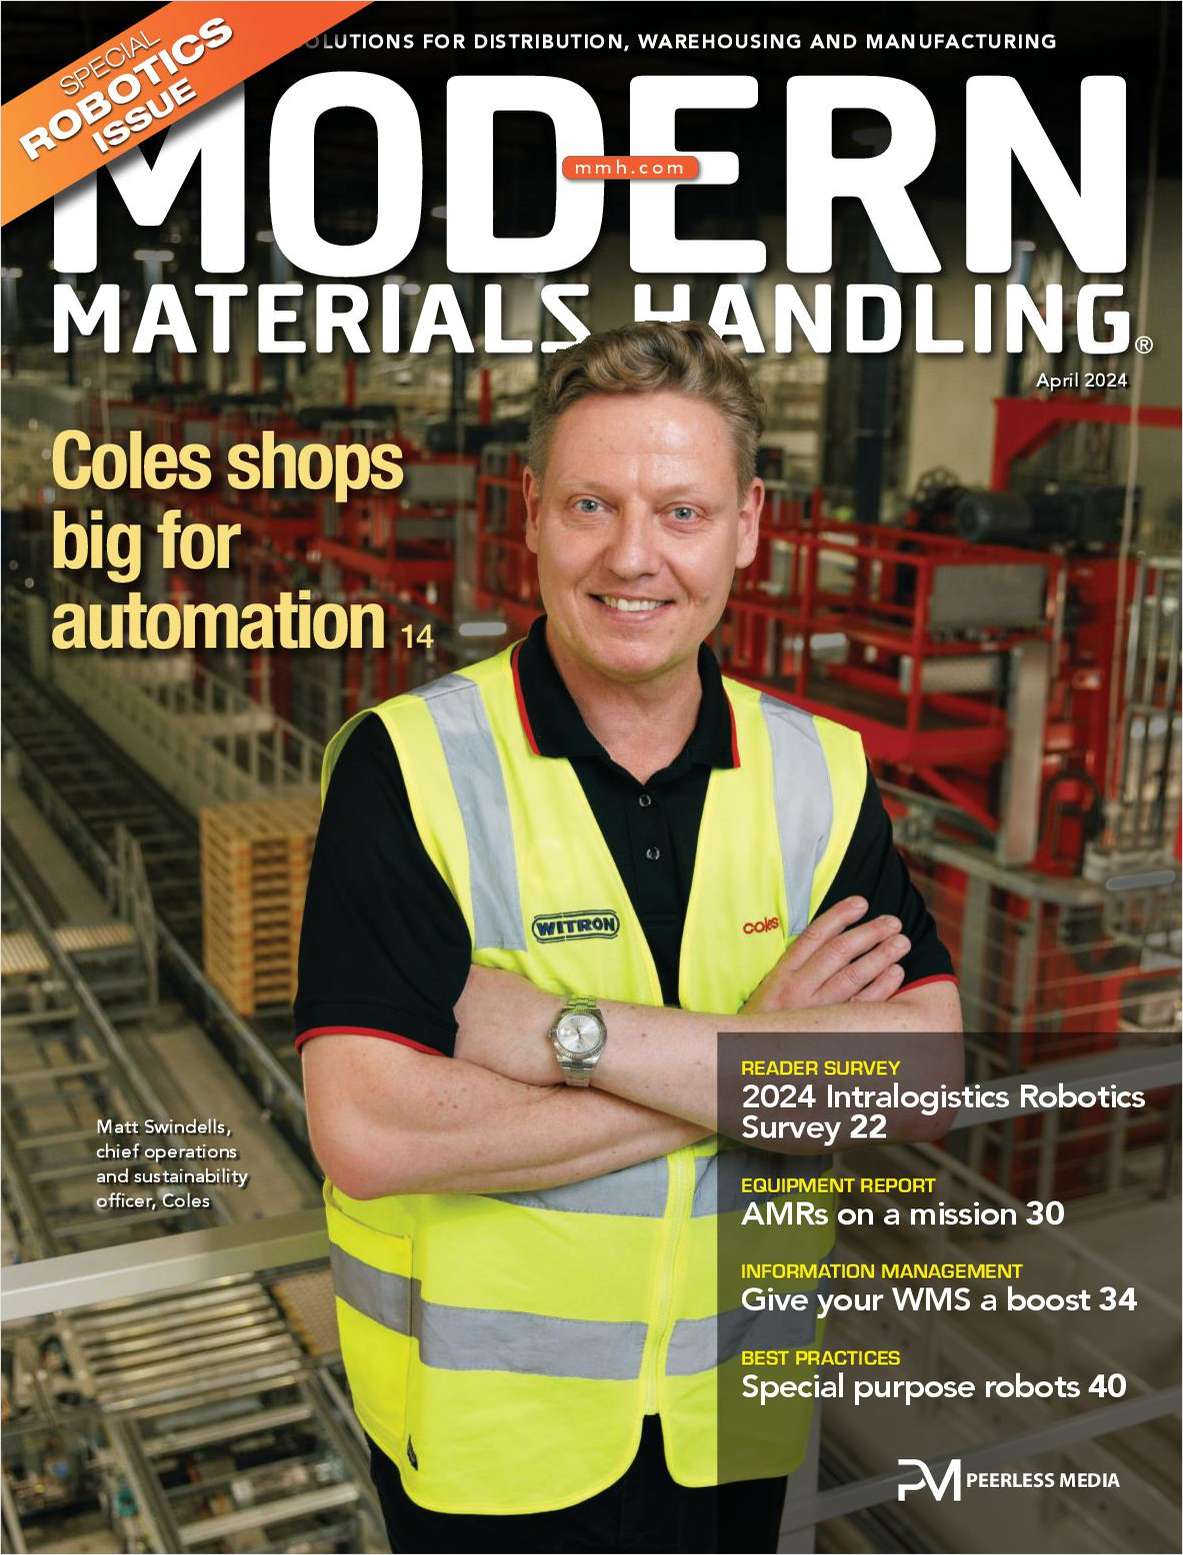 Modern Materials Handling: Coles shops big for automation